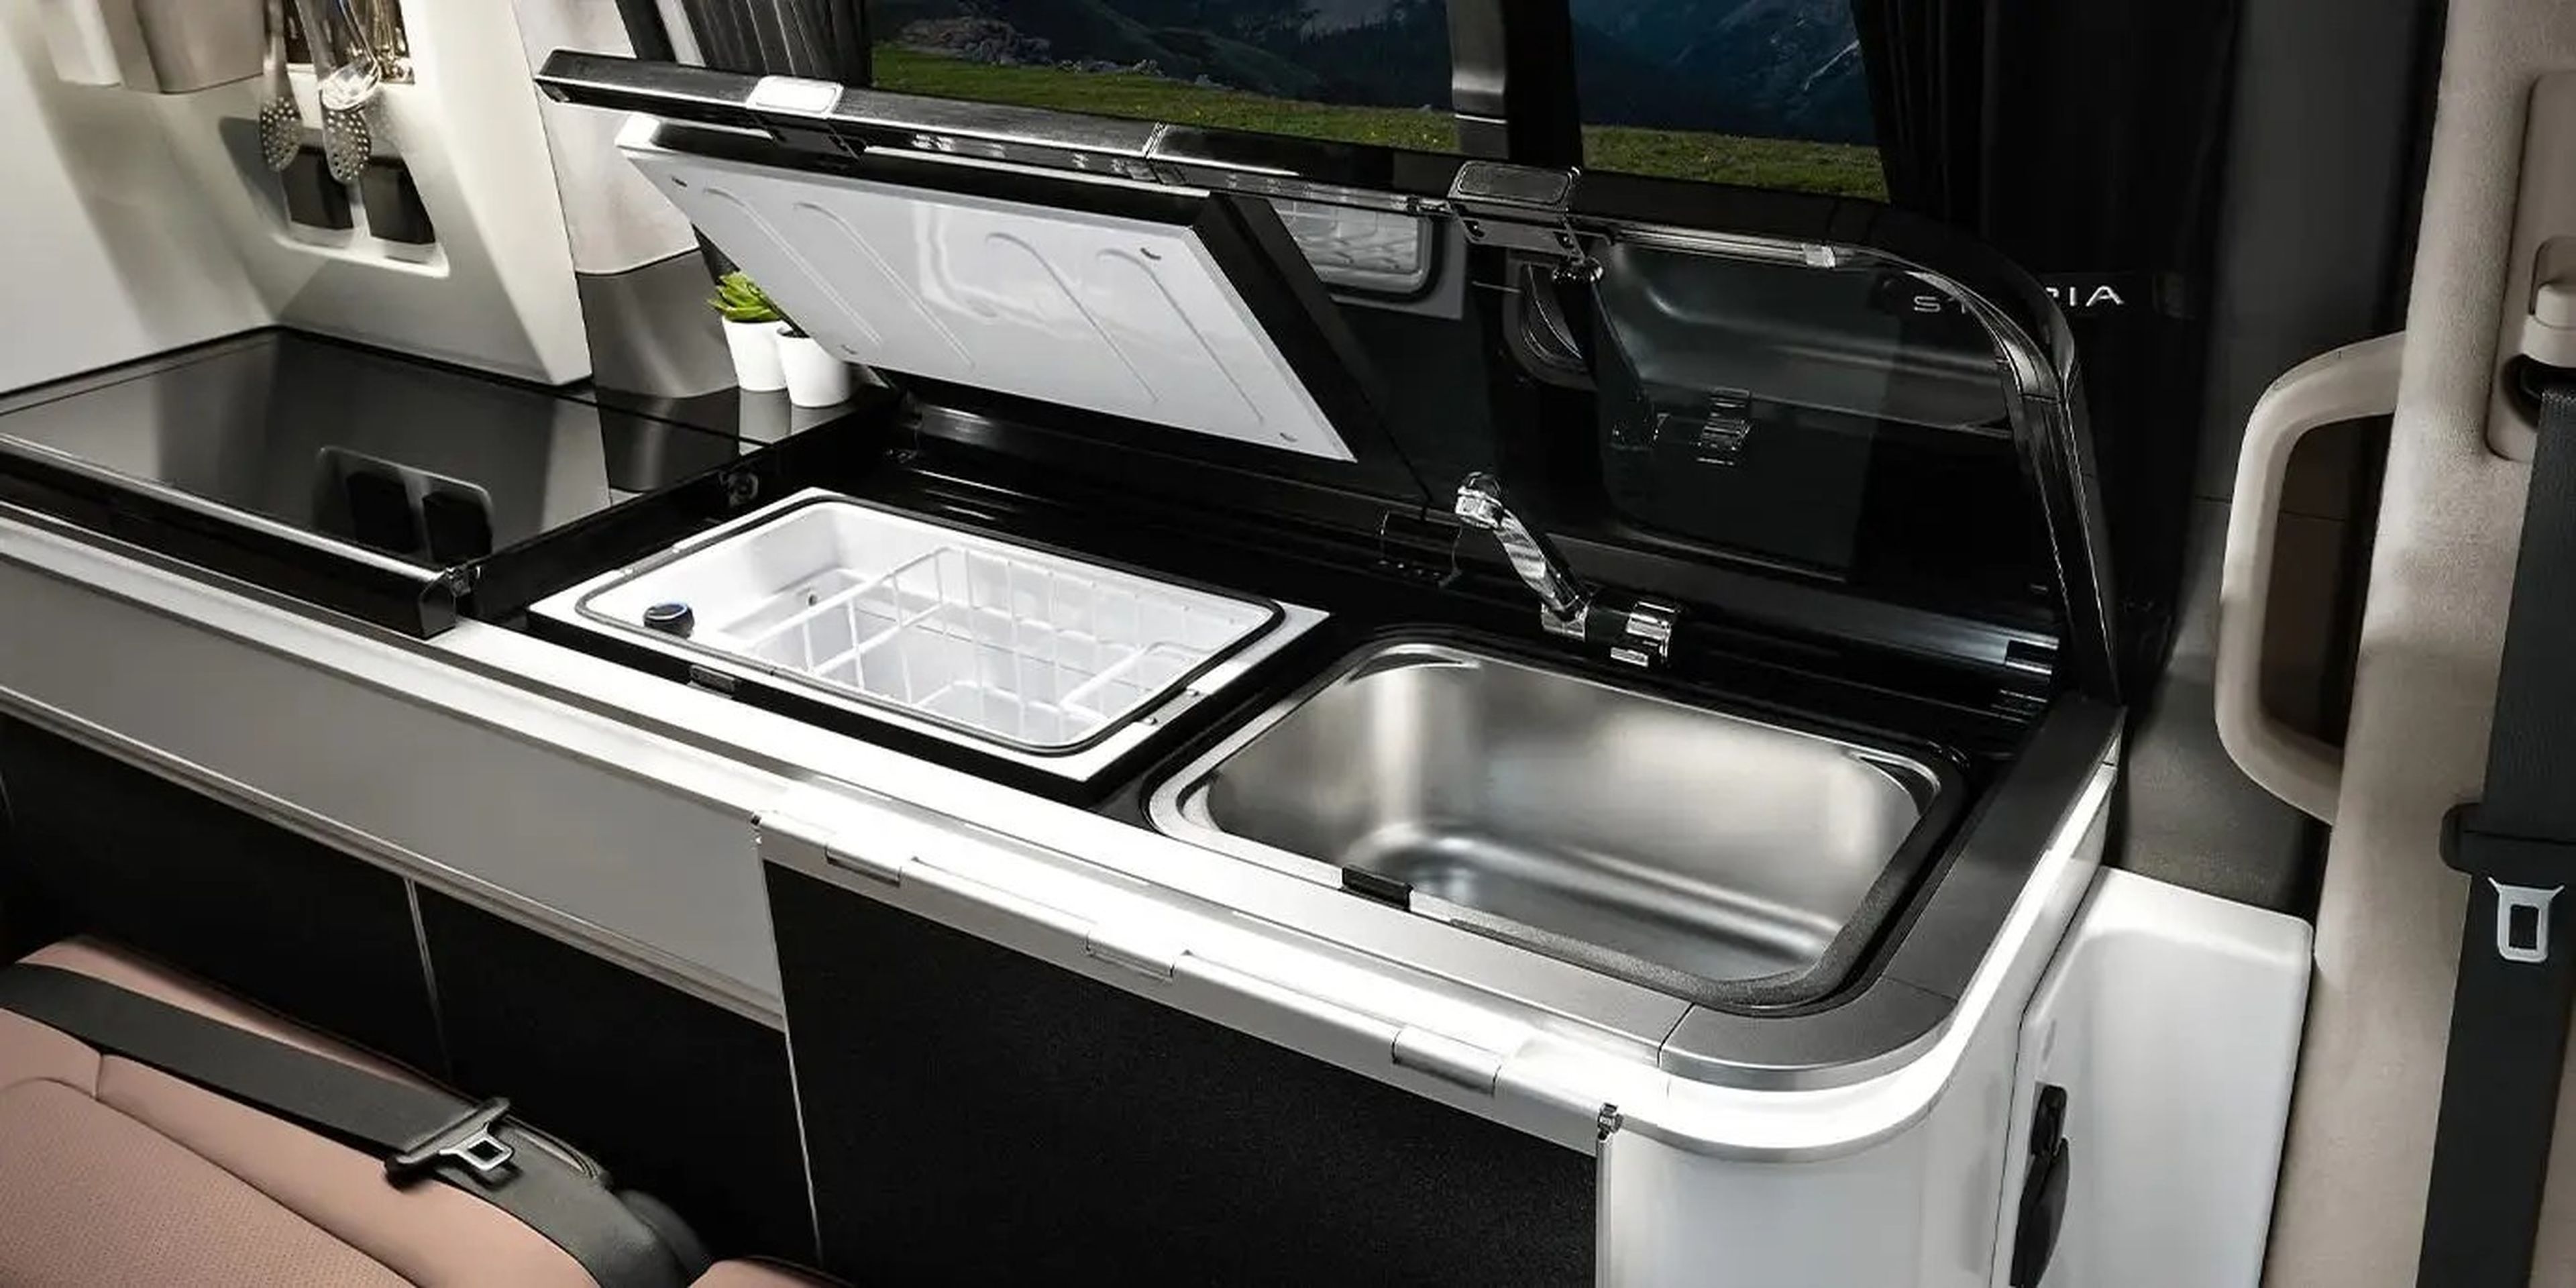 The Hyundai Staria Lounge Camper's kitchen with a sink